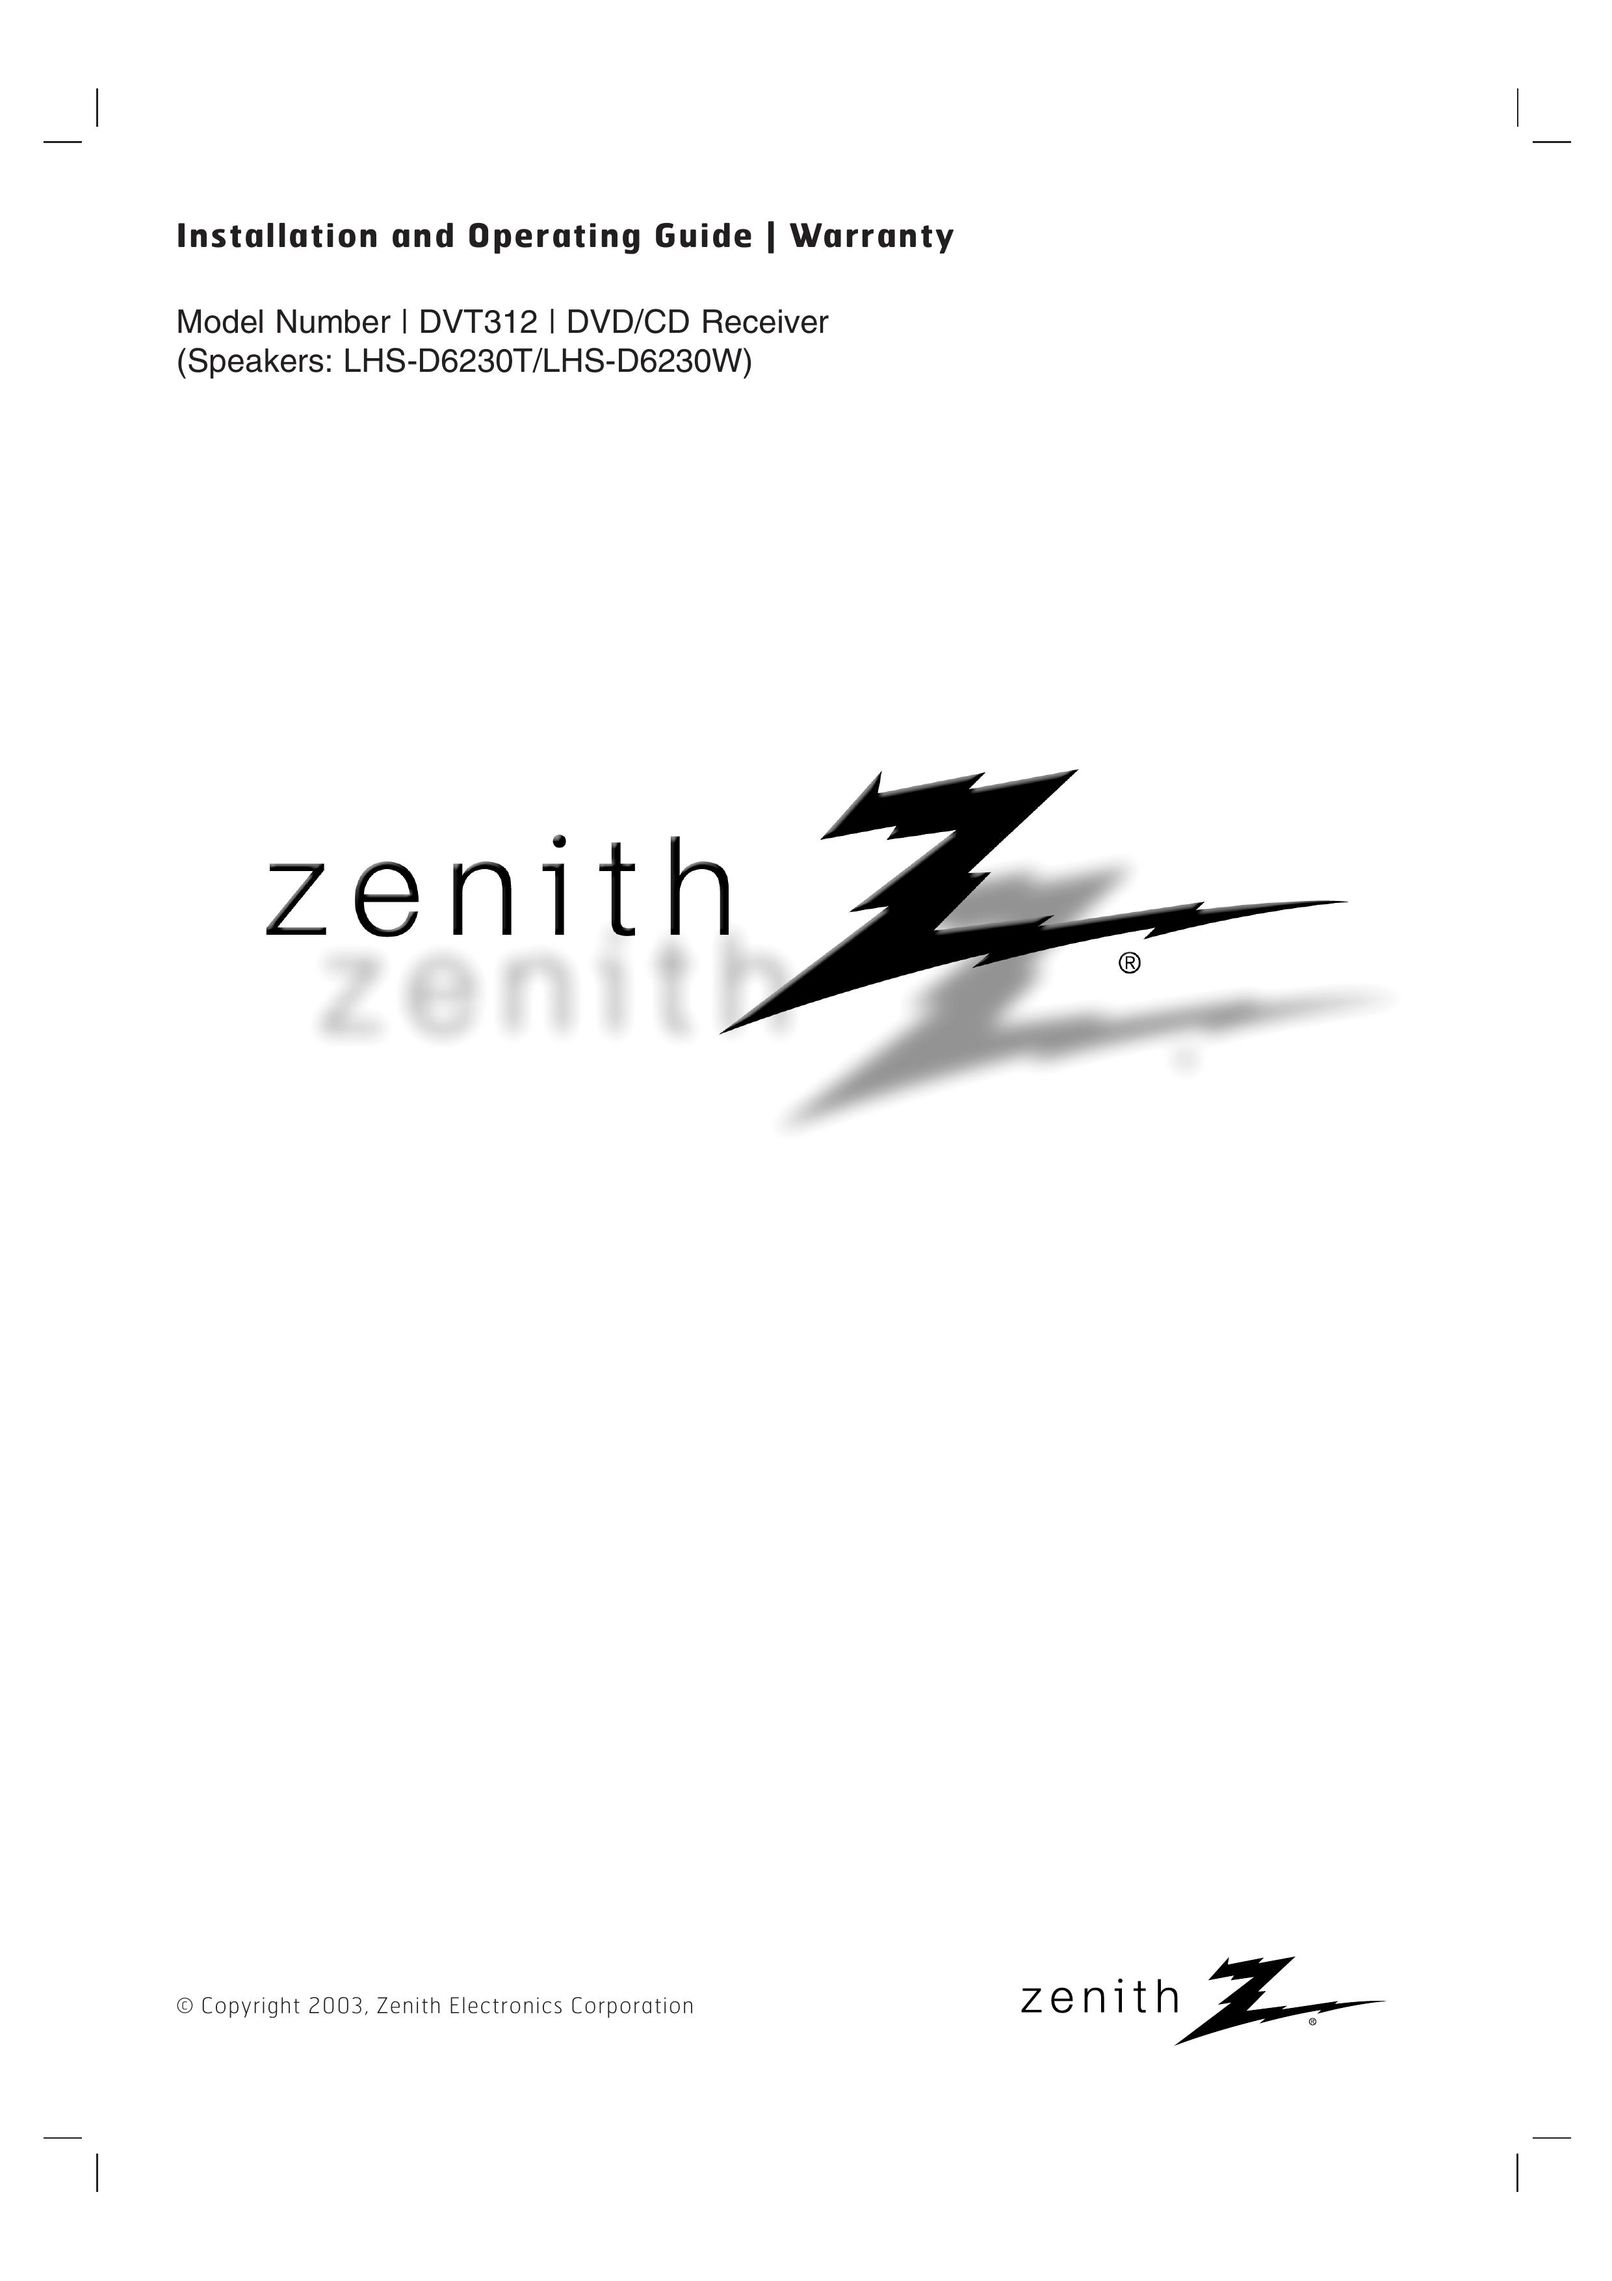 Zenith DVT312 Home Theater System User Manual